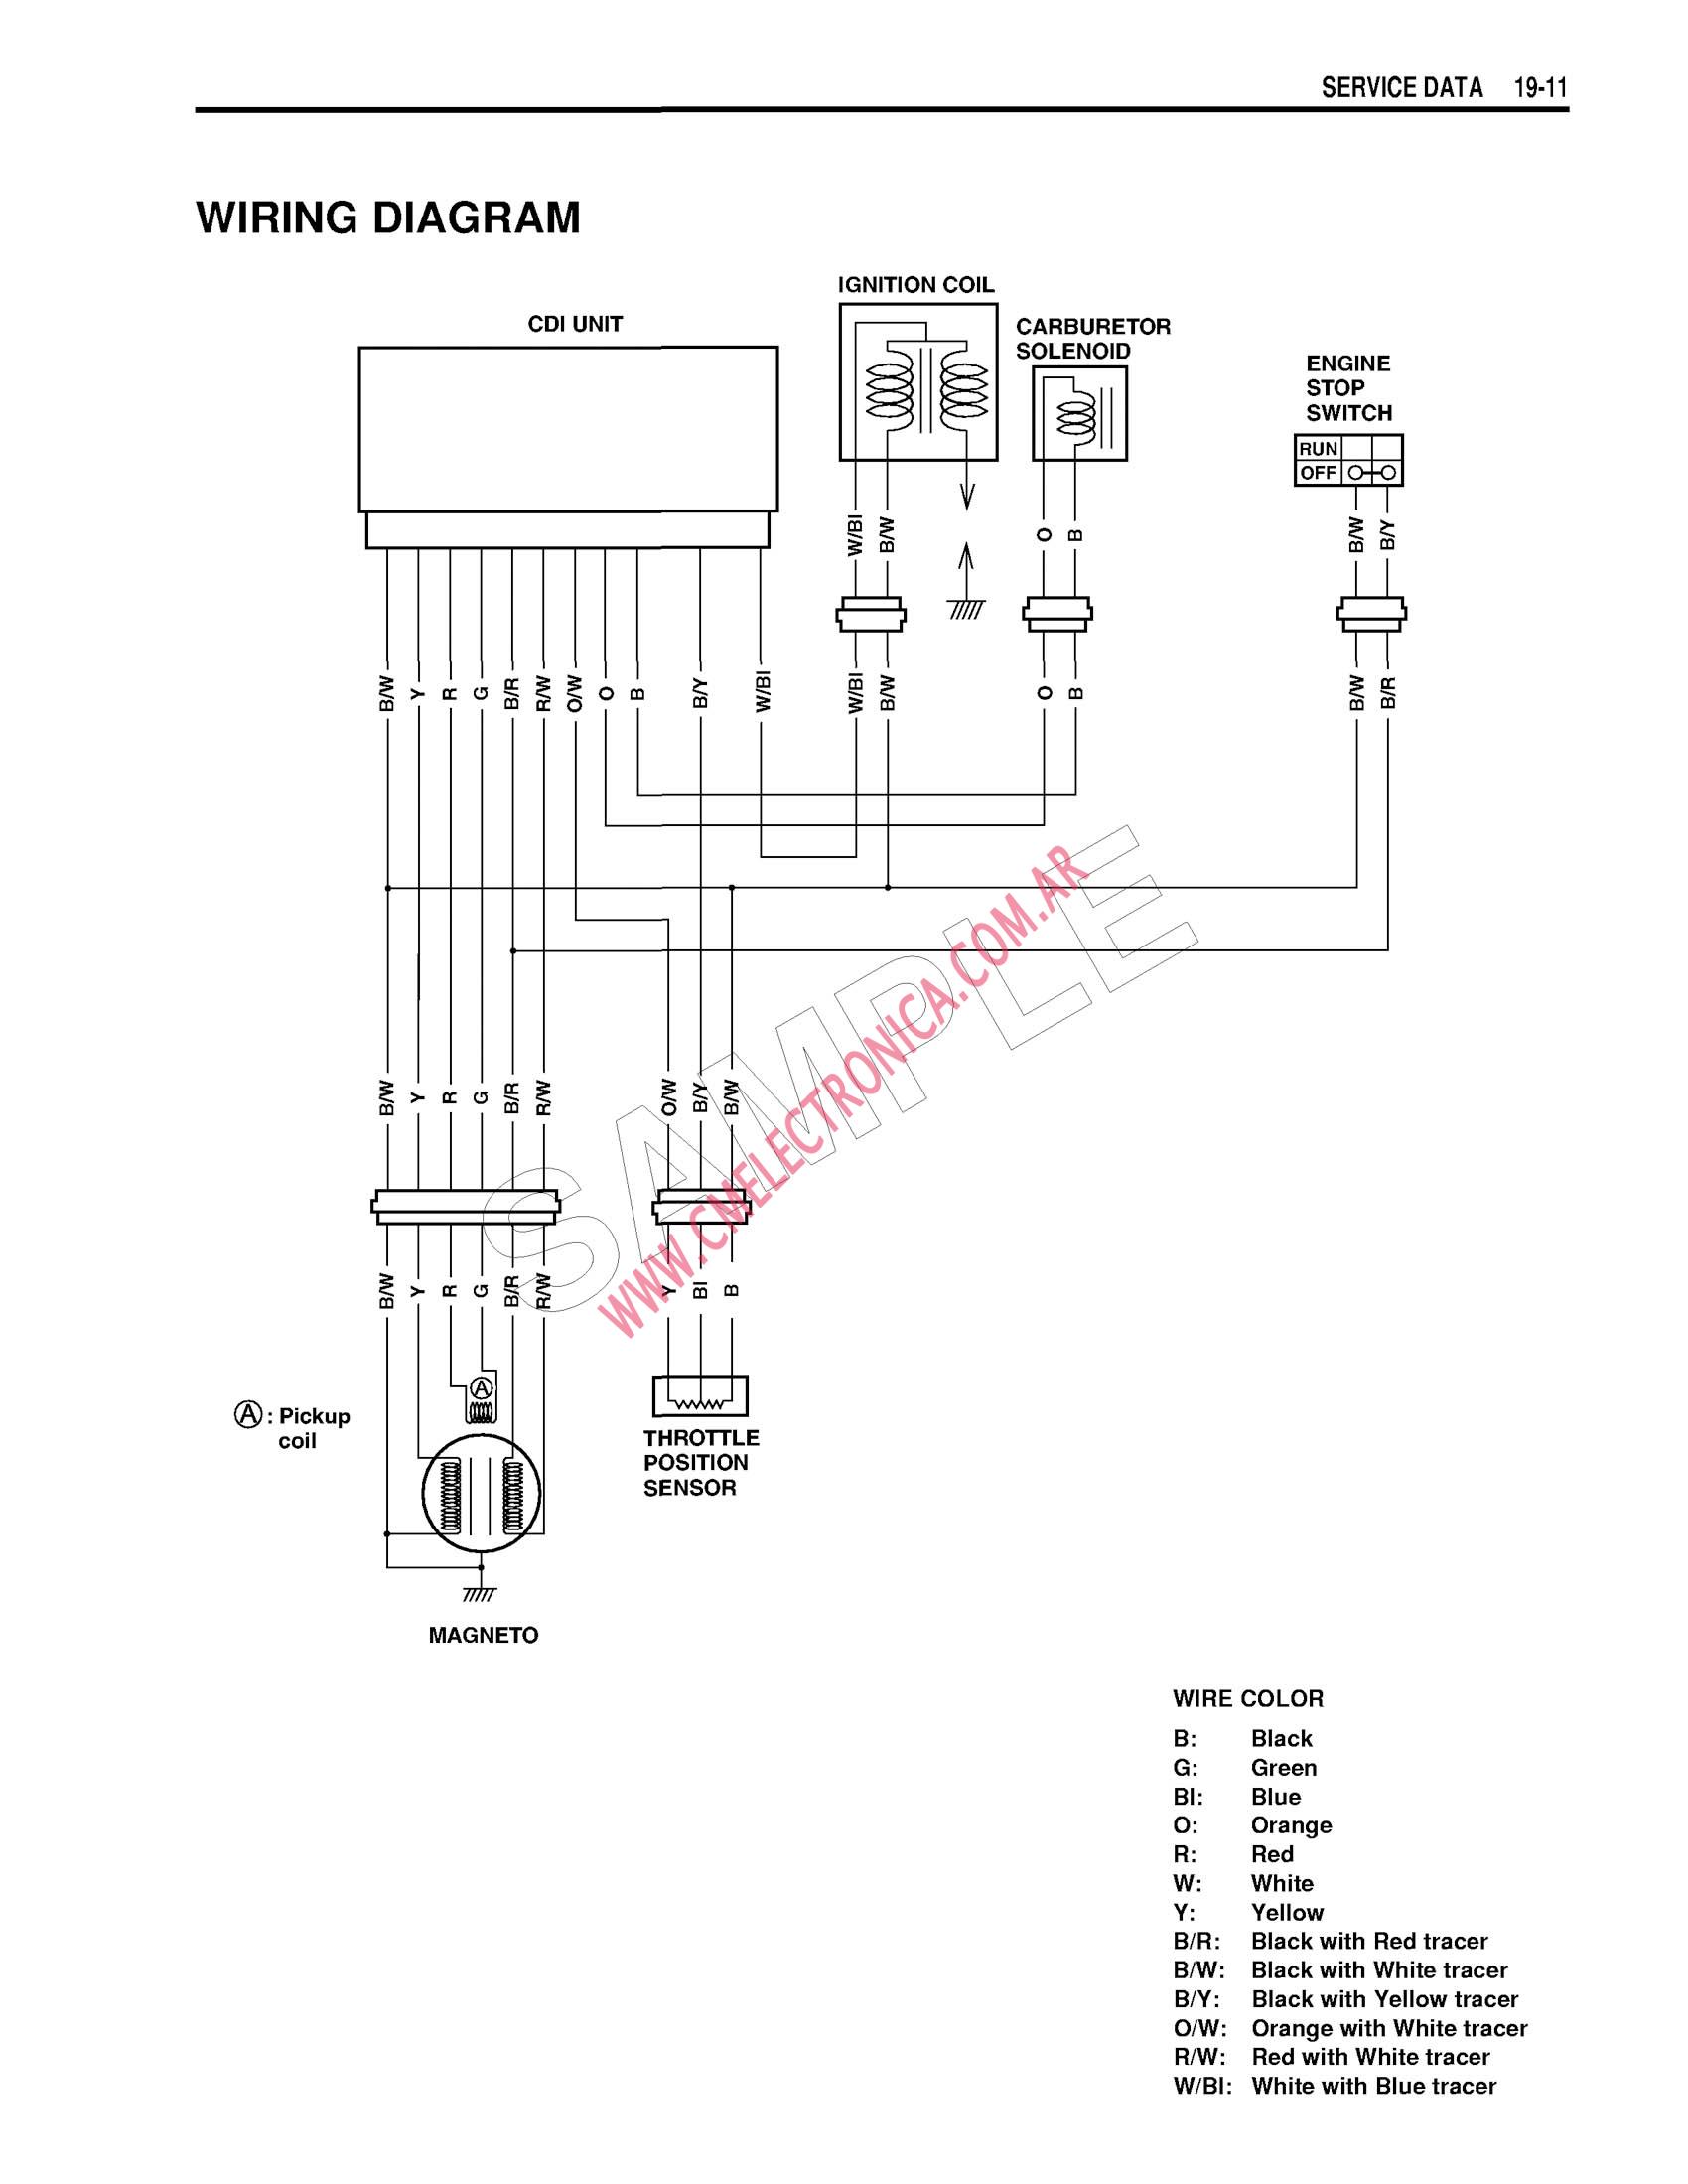 Basic Ignition Wiring Diagram from www.cmelectronica.com.ar